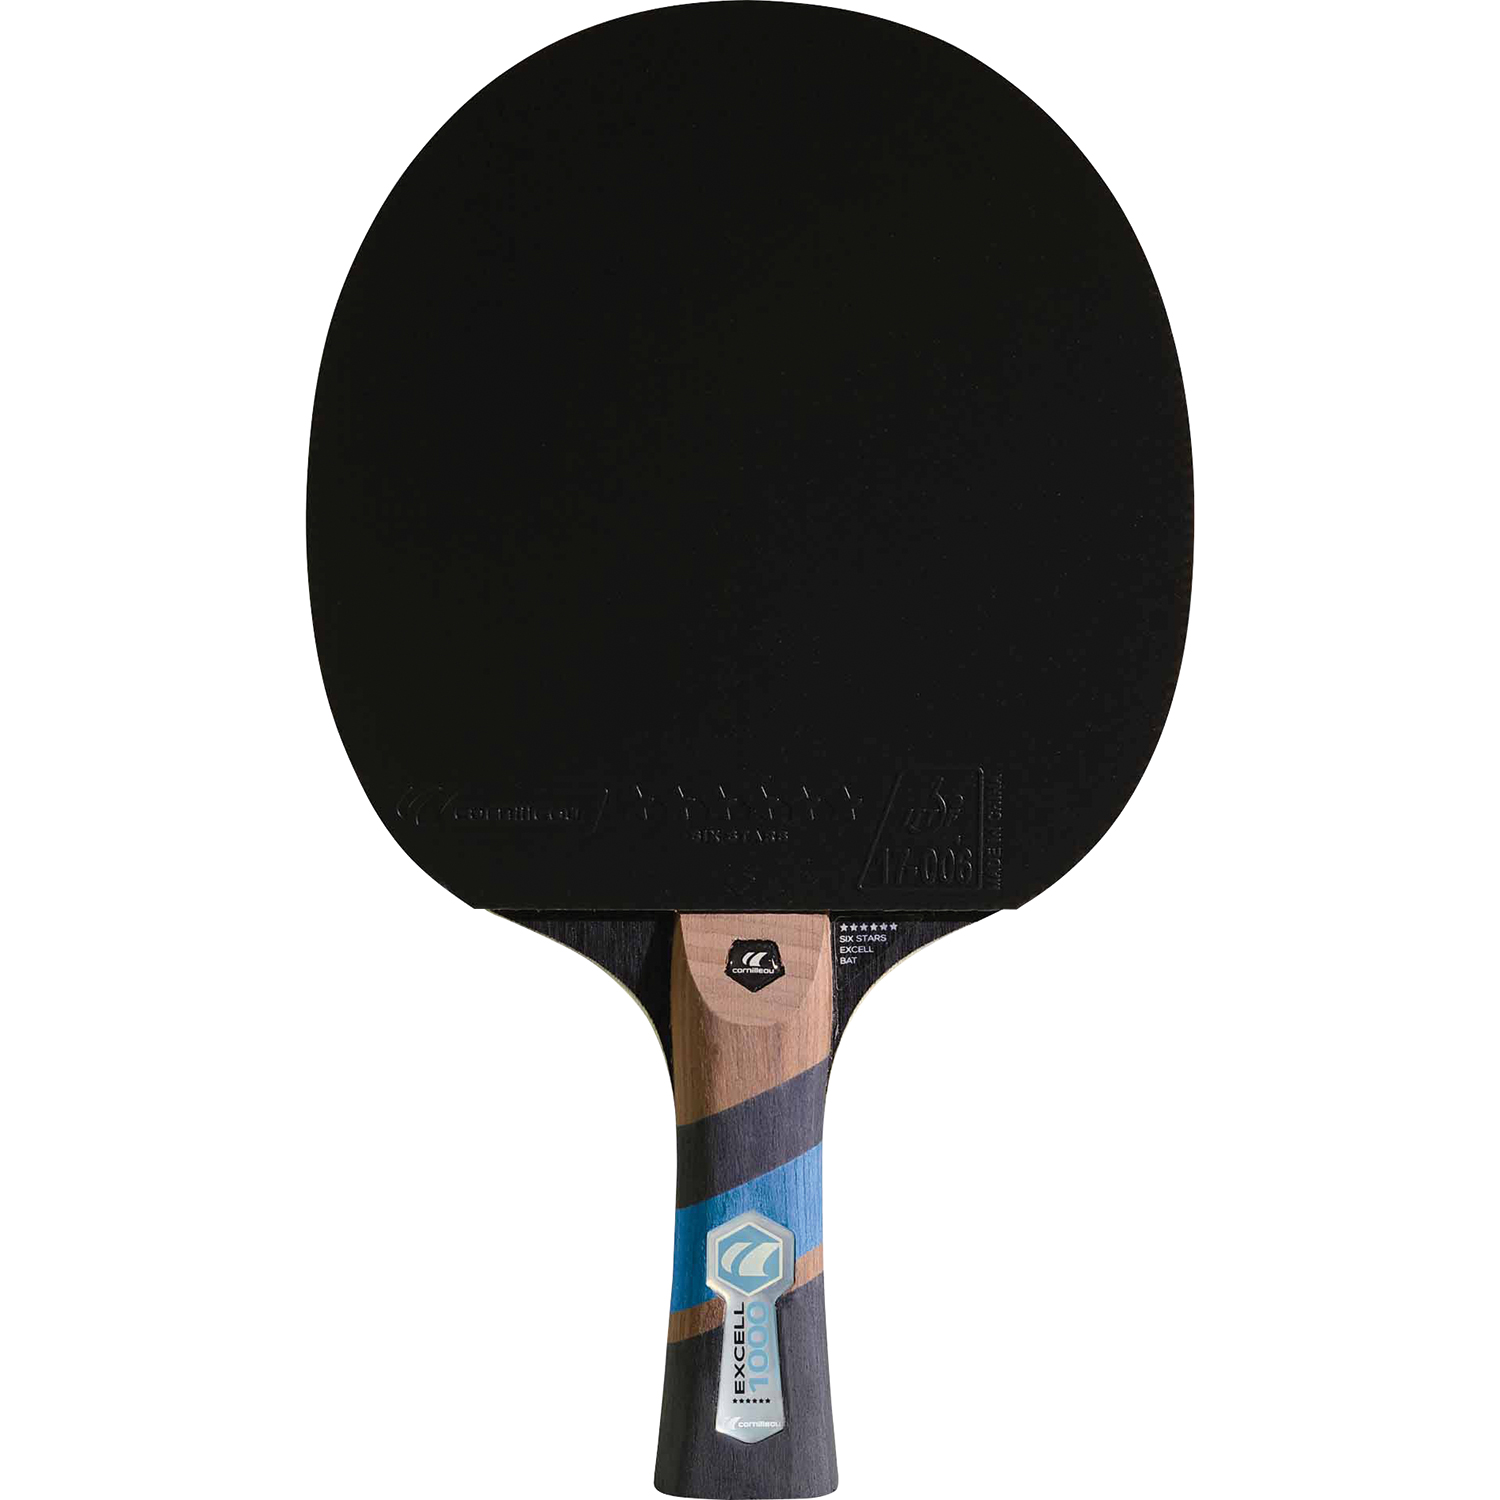 Ping Pong Cornililleau Sport 1000 Excel Carbon 411000 | Sport Zone MKP